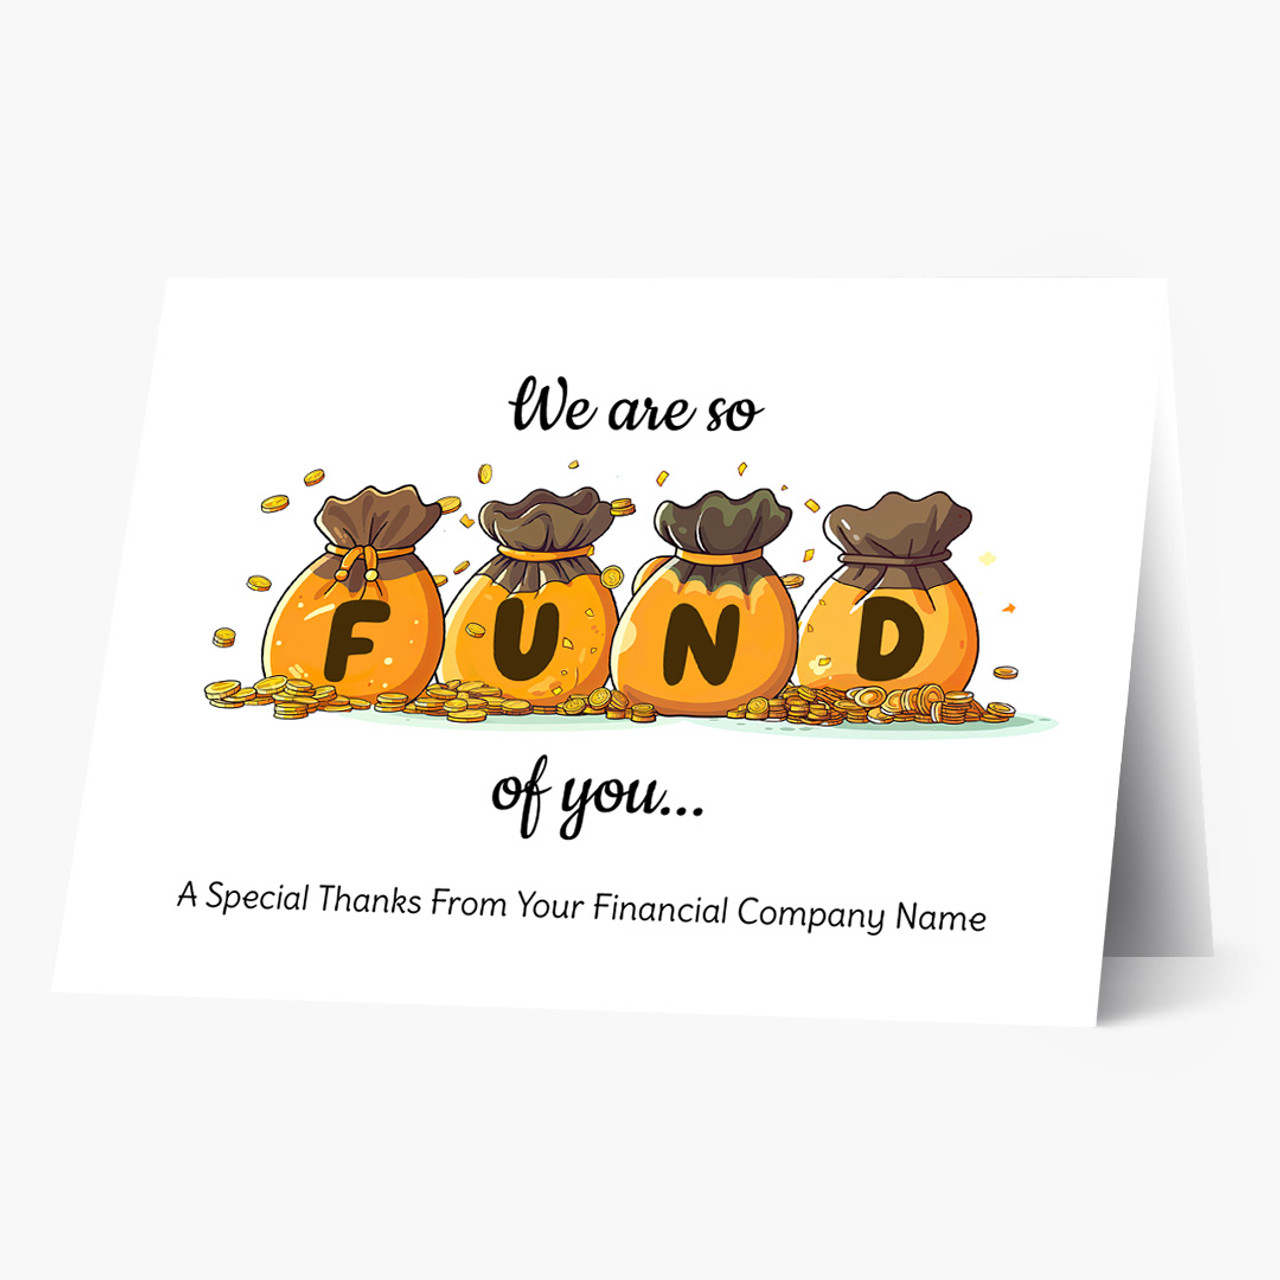 So Fund of You Thank You Card